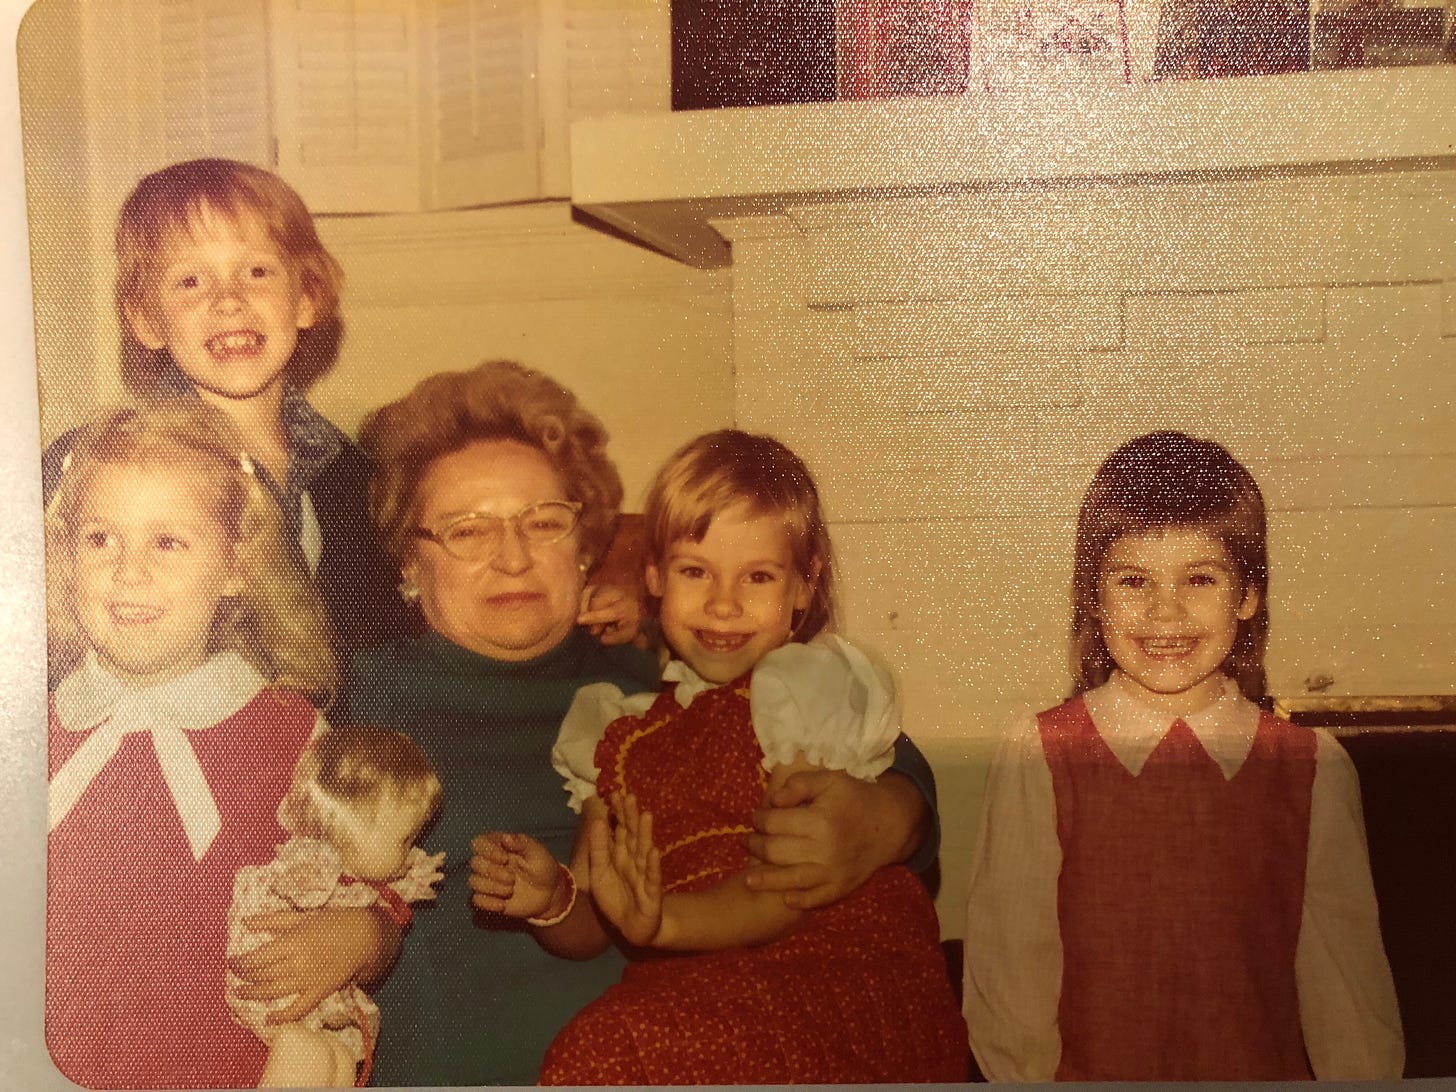 Family gathering in front of a white brick fireplace with a grandmother wearing glasses and four grandchildren (one boy, 3 girls) ages 4-8. 